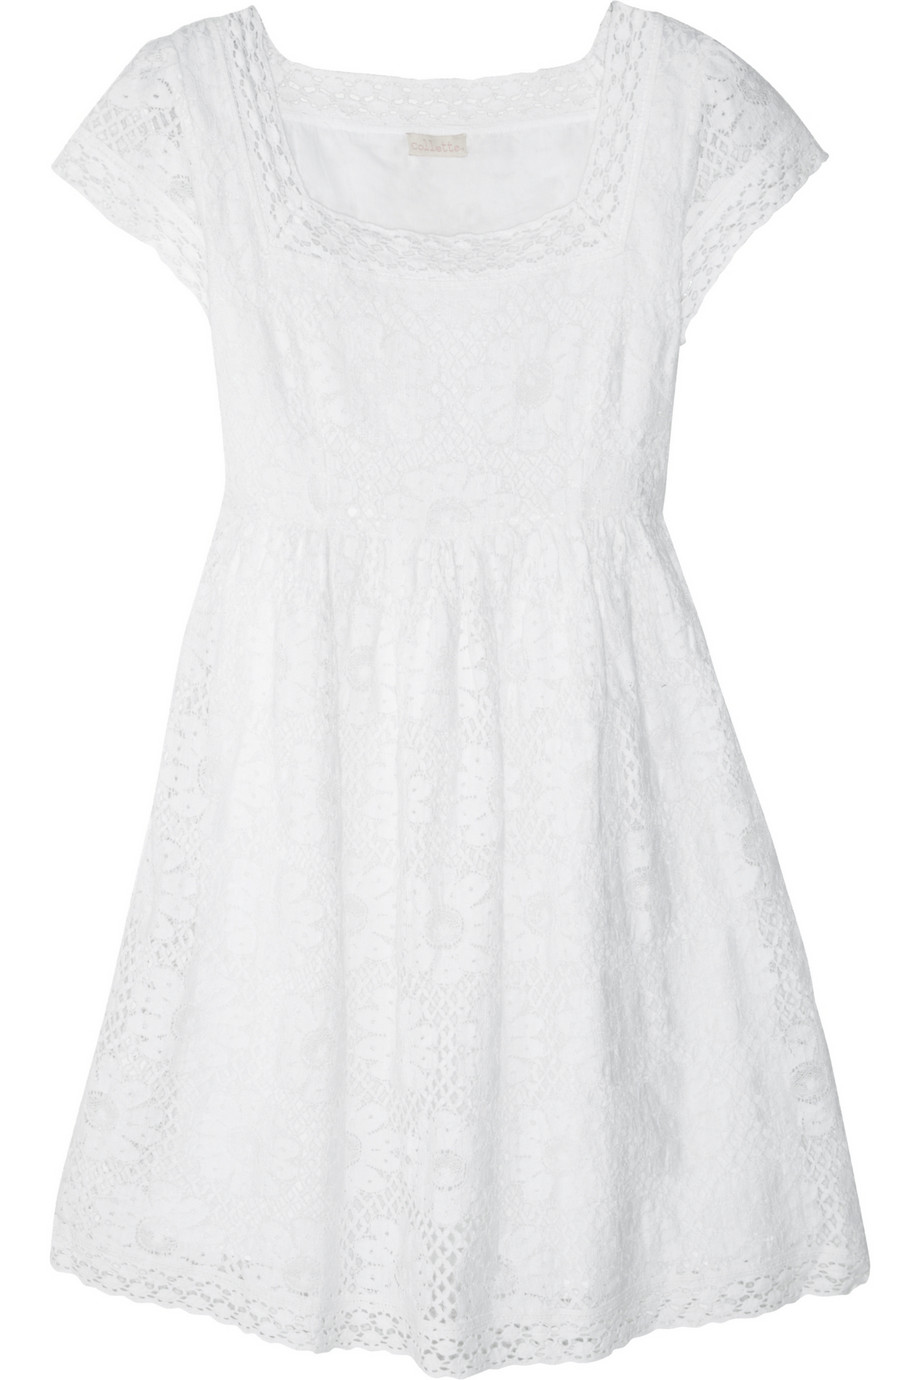 Lyst - Collette by collette dinnigan Cottonblend Lace Dress in White